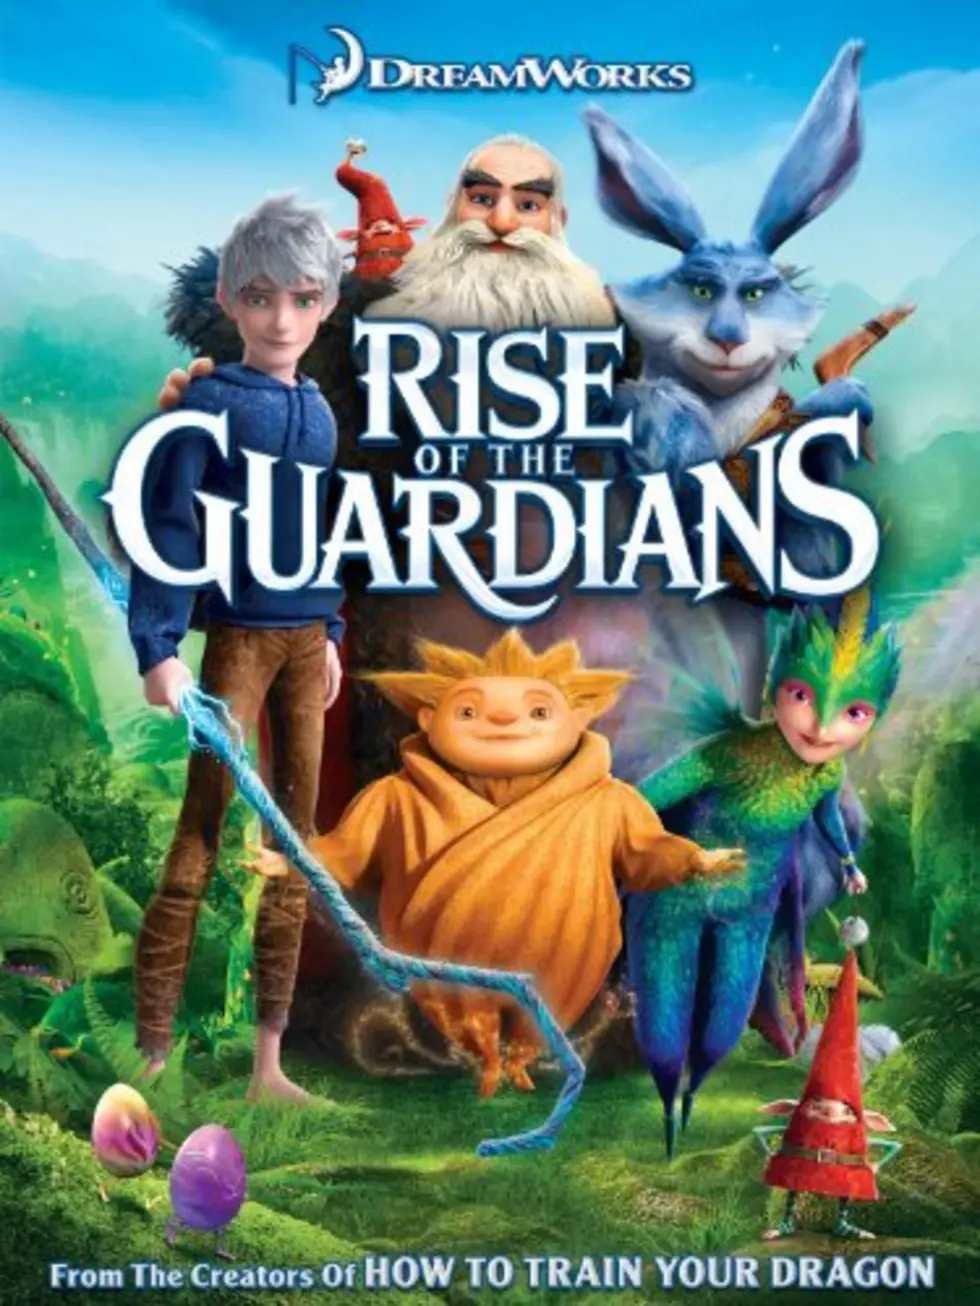 Tonight&#8217;s Free Downtown Movie is &#8220;Rise Of The Guardians&#8221;